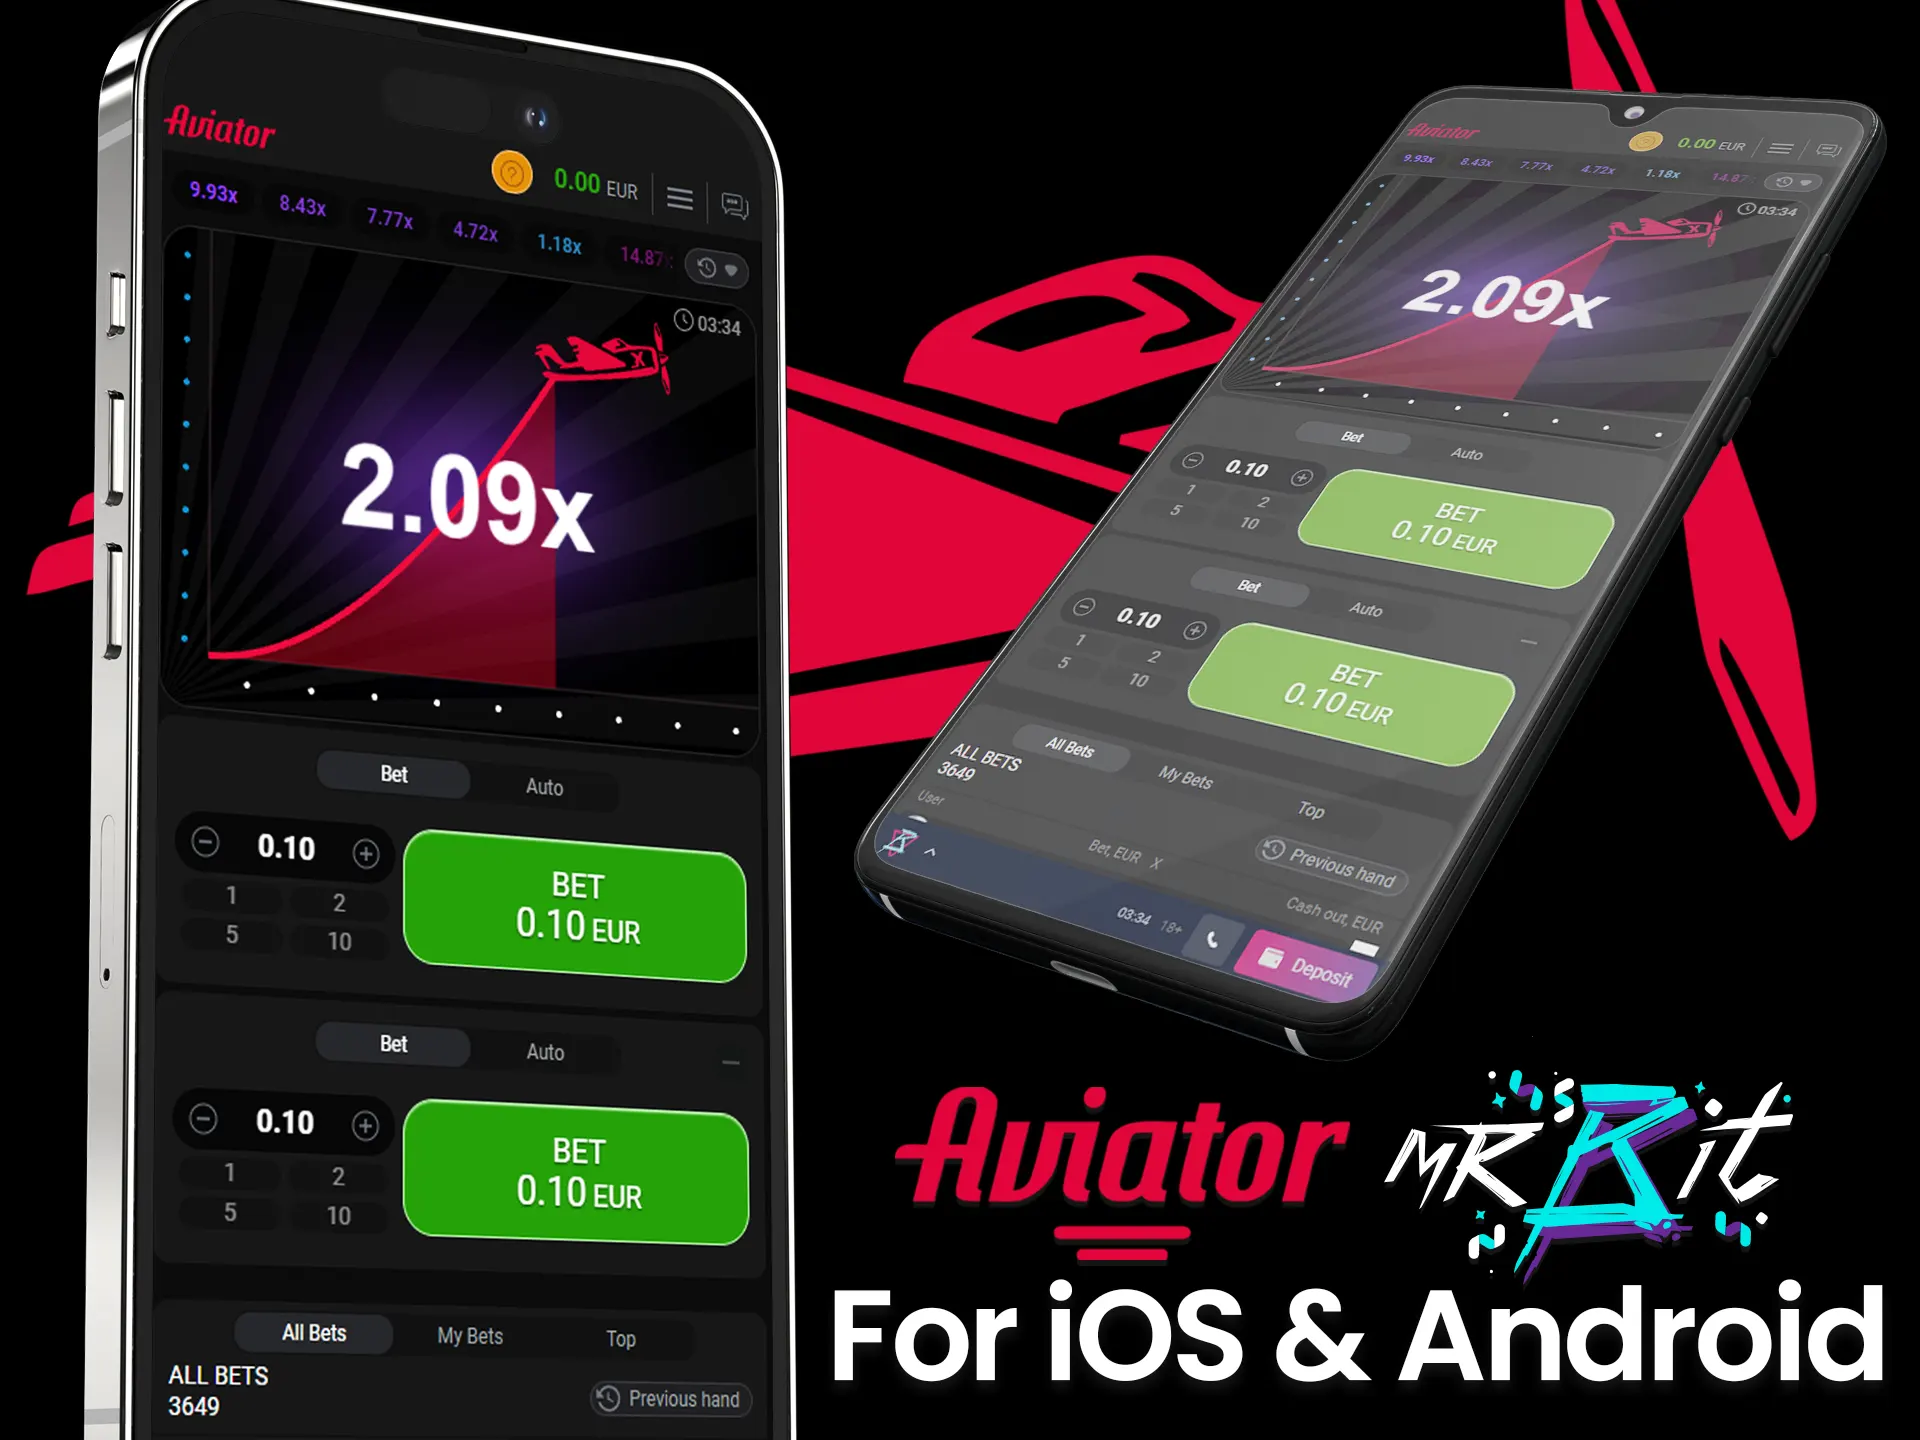 Coming soon is an app from Mr. Bit to play Aviator for Android and iOS.